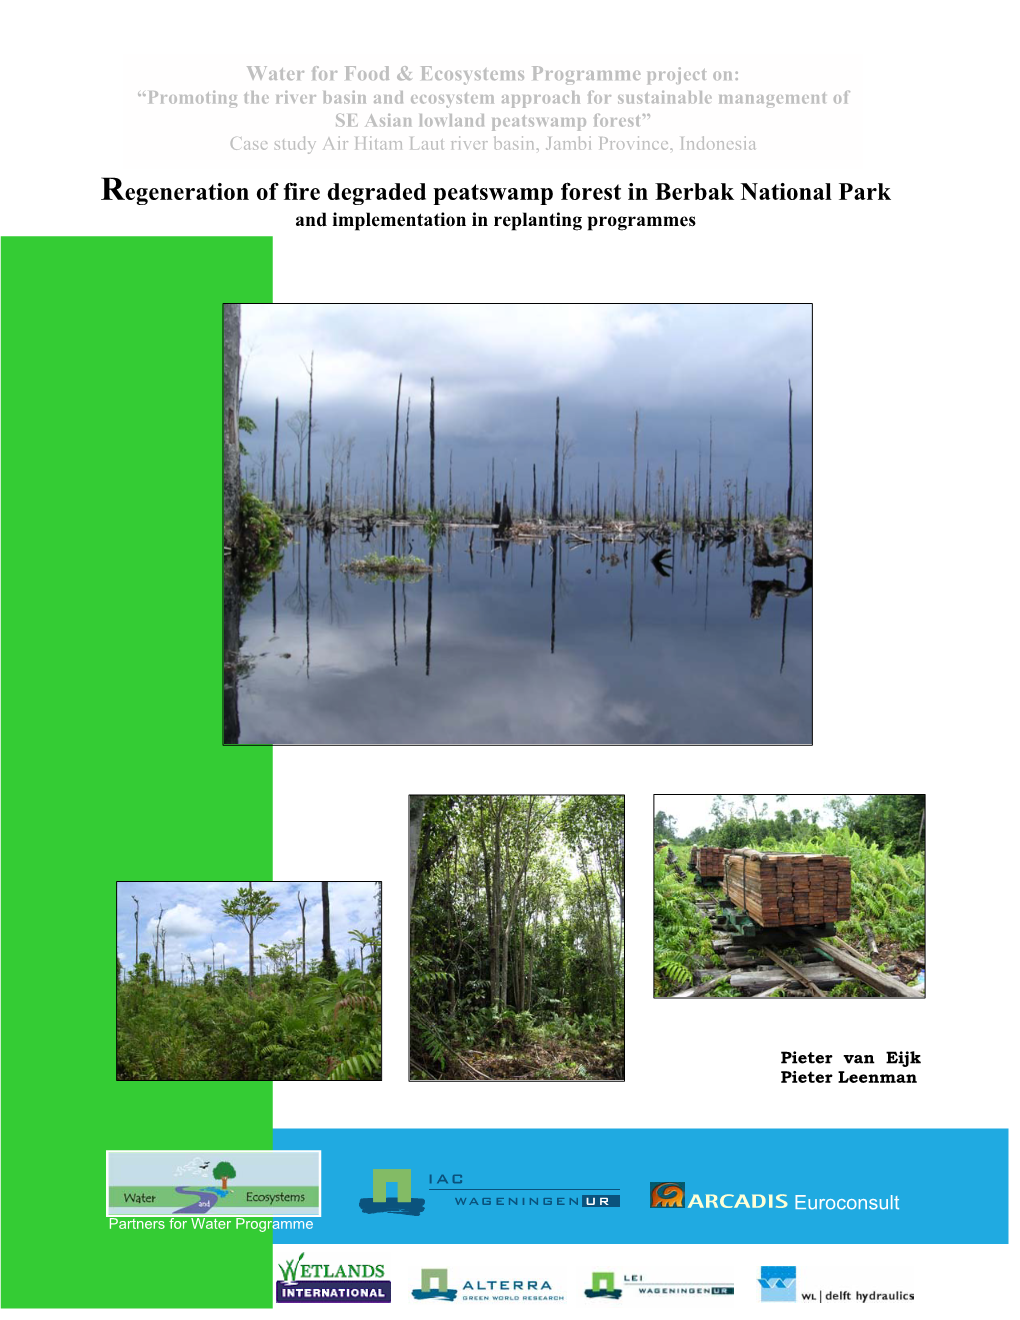 Regeneration of Fire Degraded Peatswamp Forest in Berbak National Park and Implementation in Replanting Programmes